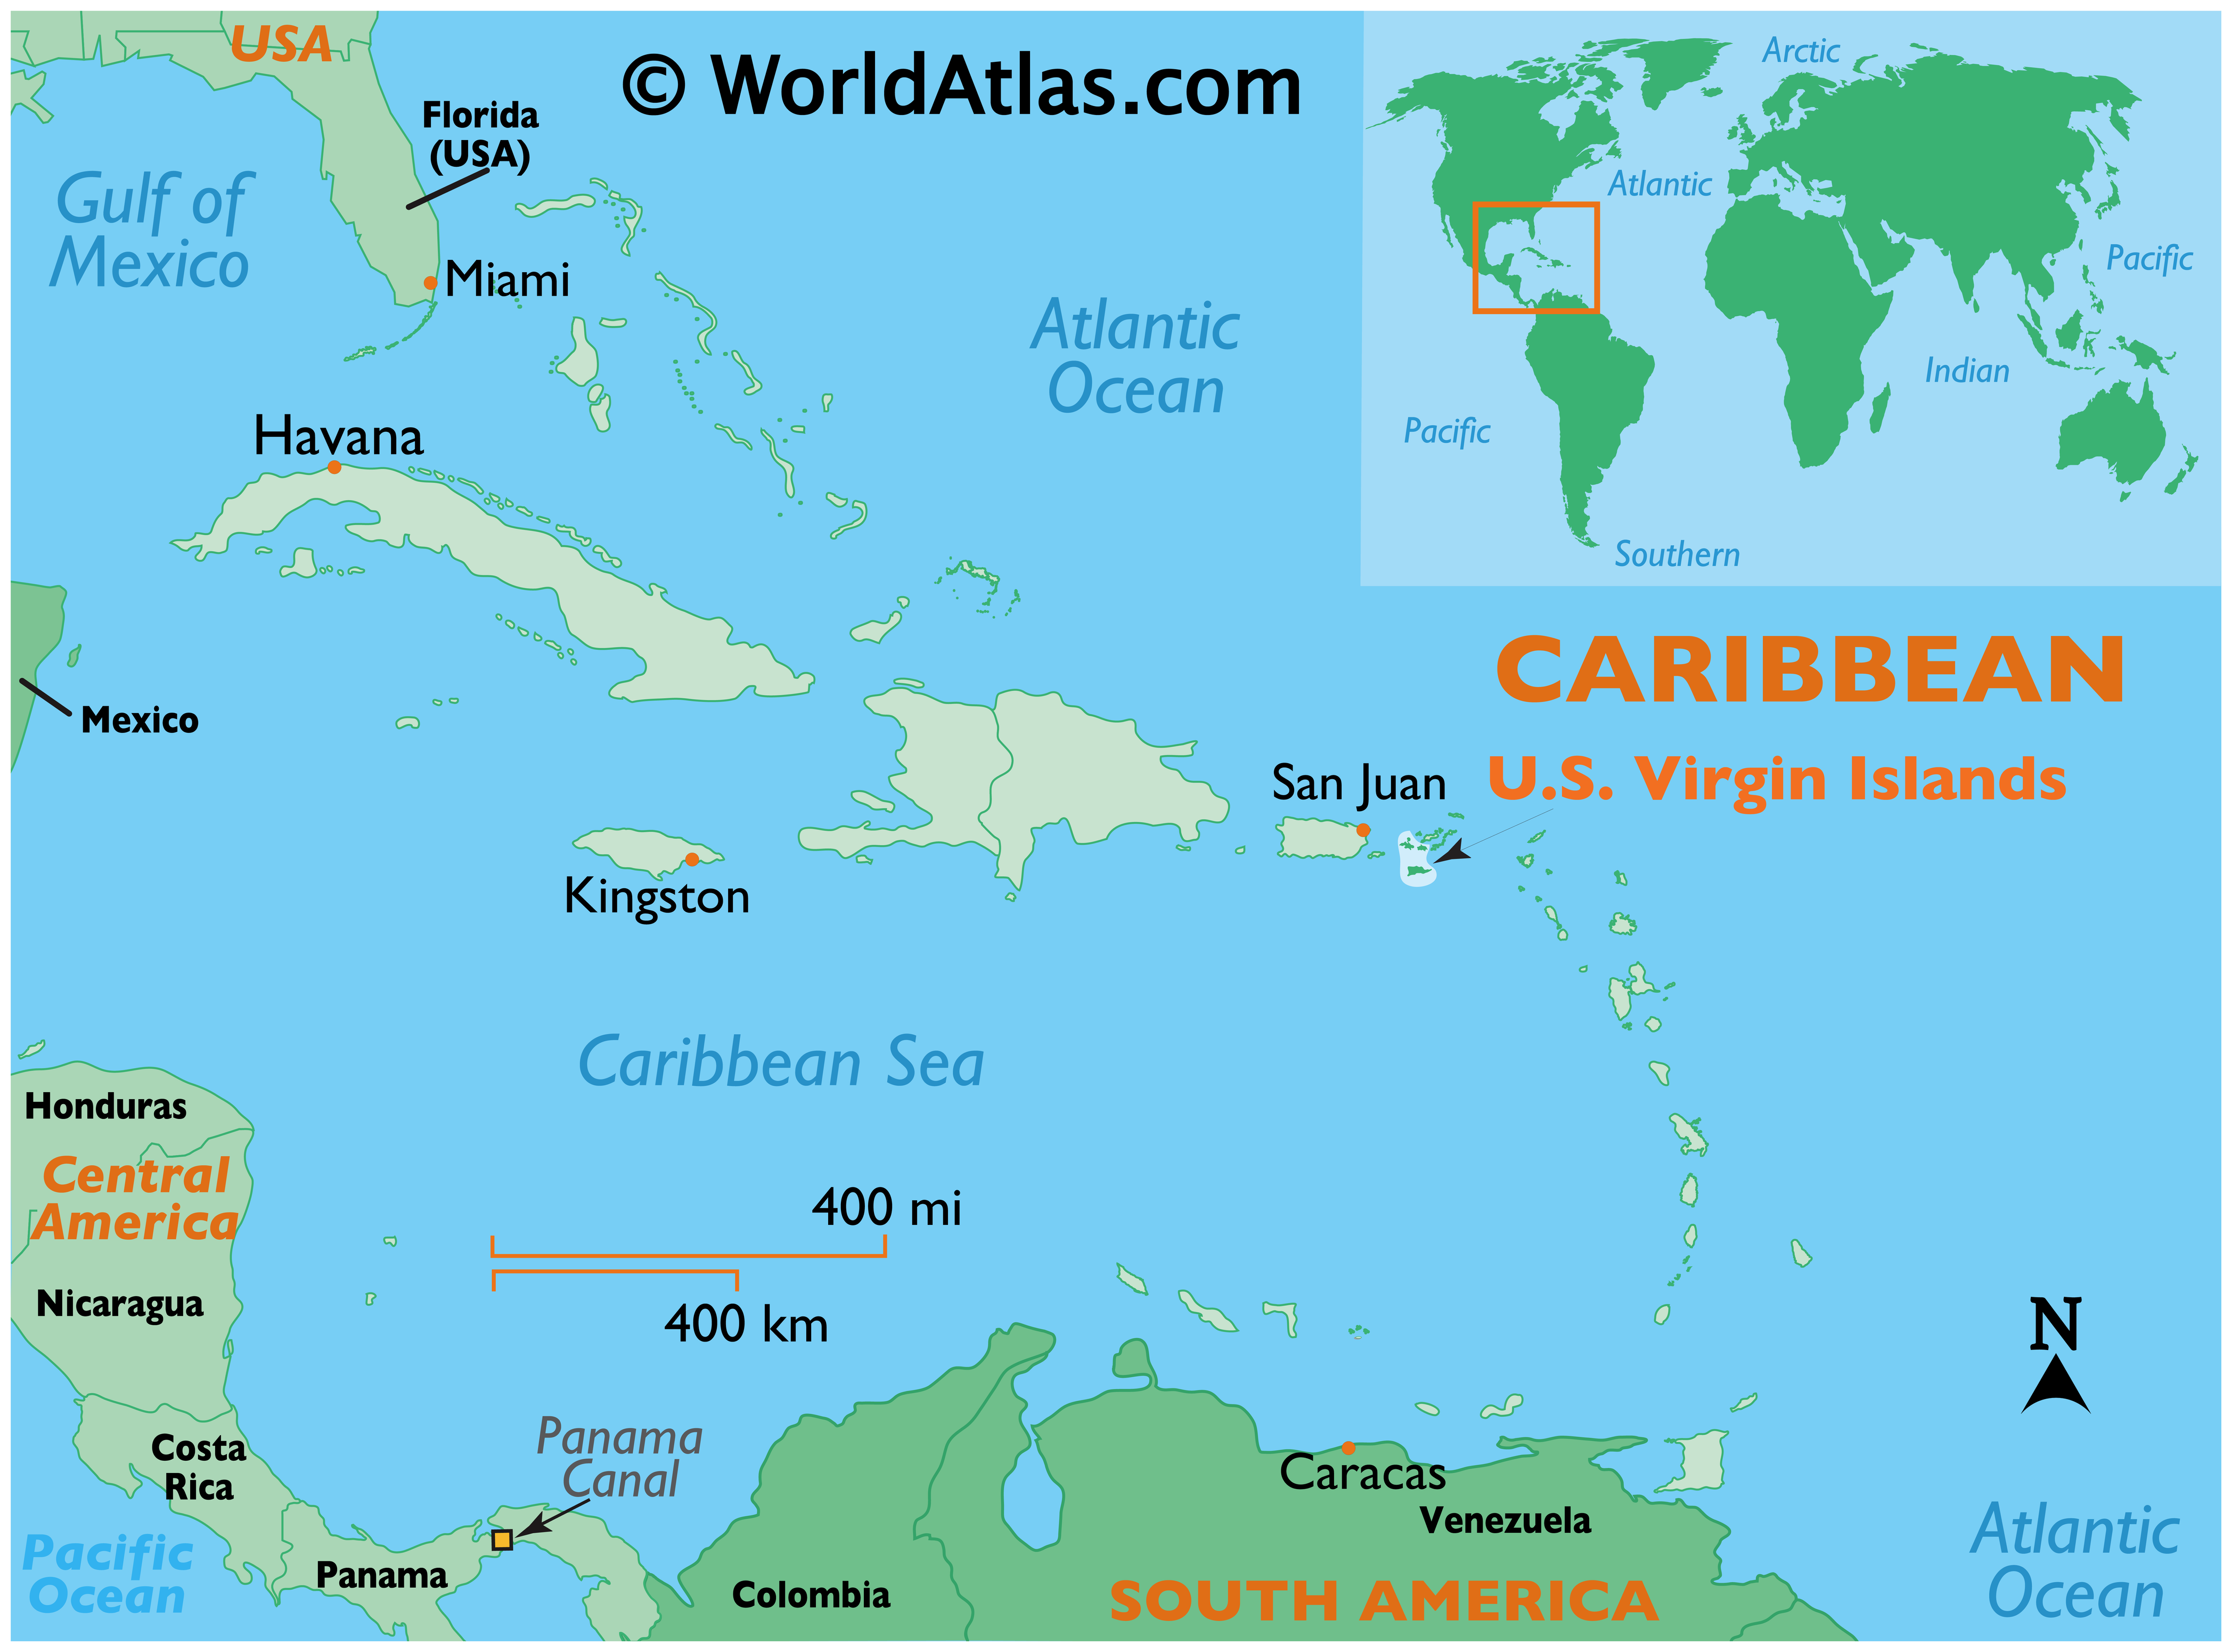 Us Virgin Islands Map Us Virgin Islands Map Getting In Places To See The Islands Host Nearly 3 Million Tourists The Virgin Islands Are Geographically Relative Close To